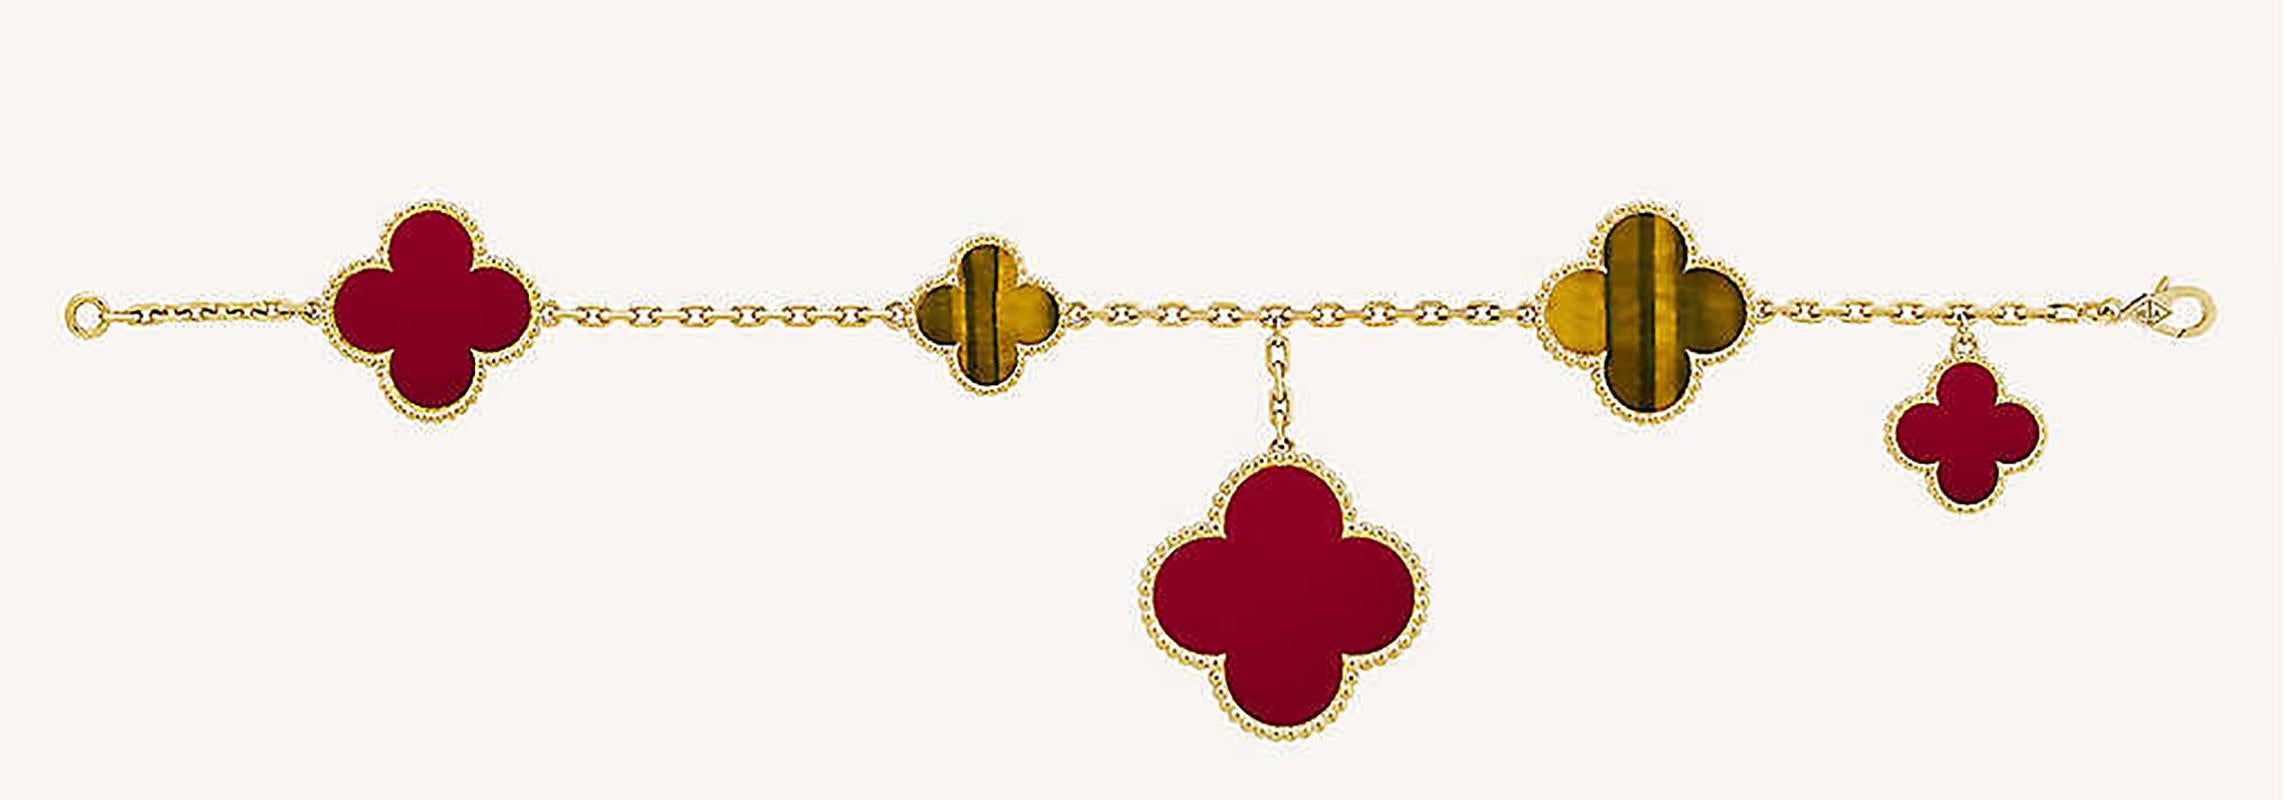 Magic Alhambra bracelet, 5 motifs, yellow gold, tiger's eye, carnelian.

VCA187
Reference : VCARN5JQ00
Item come with a box and paper

